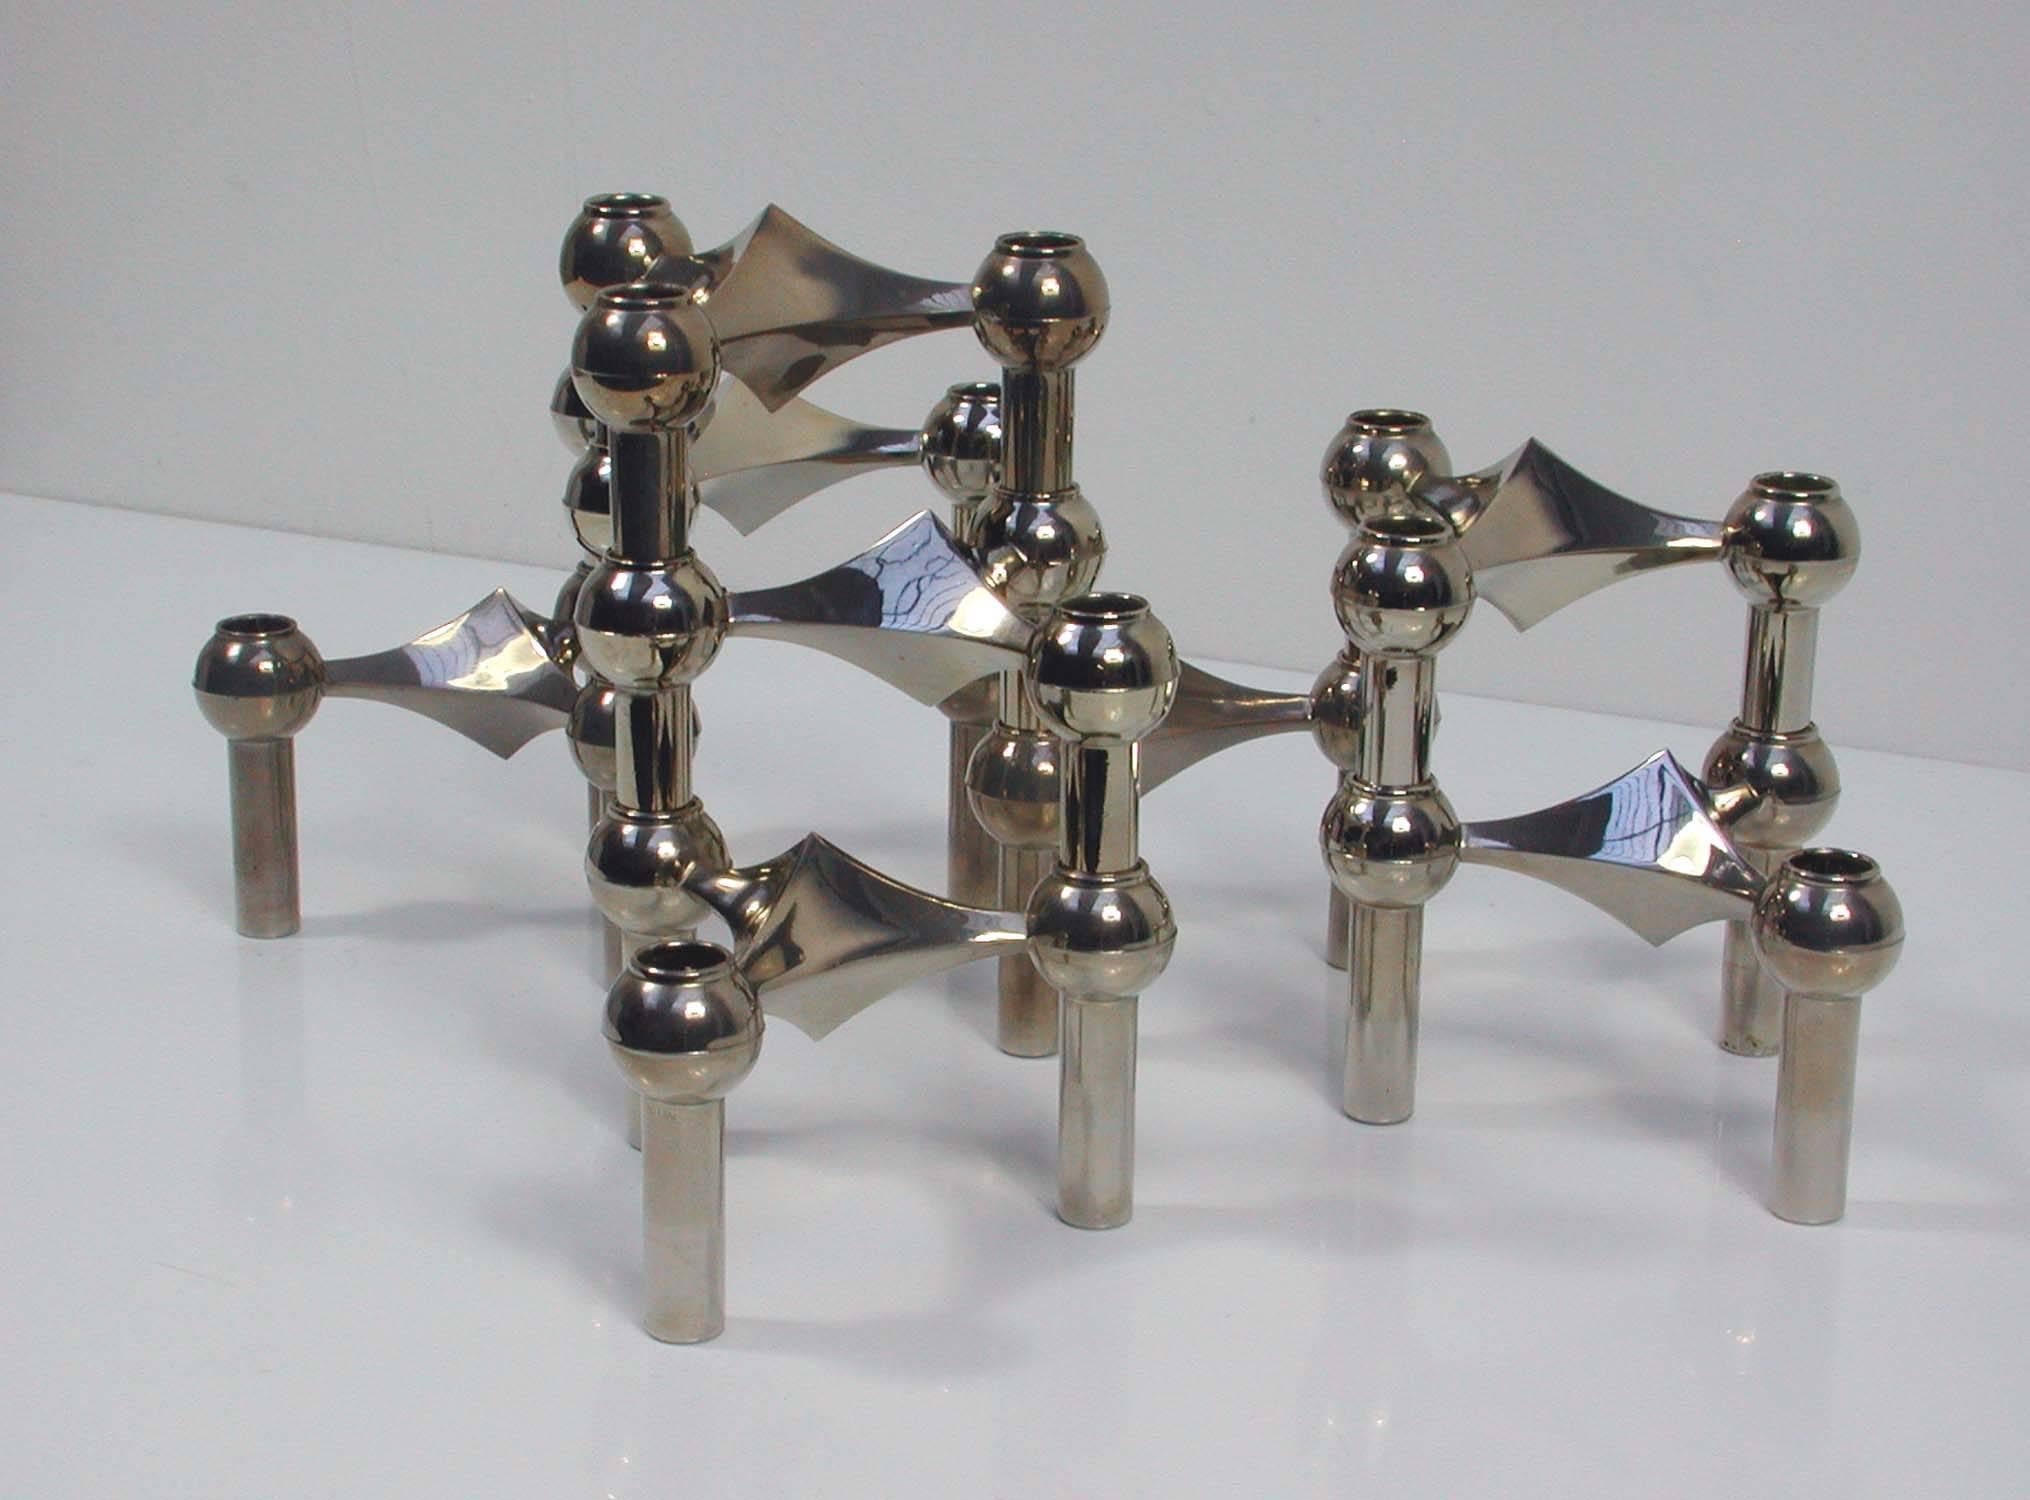 This set of eight modular stacking chrome candlesticks was designed by Fritz Nagel and Caesar Stoffi and produced by BMF in Germany in the 1960s. The candlesticks can be arranged in many different ways.

Each candlestick is app. 4